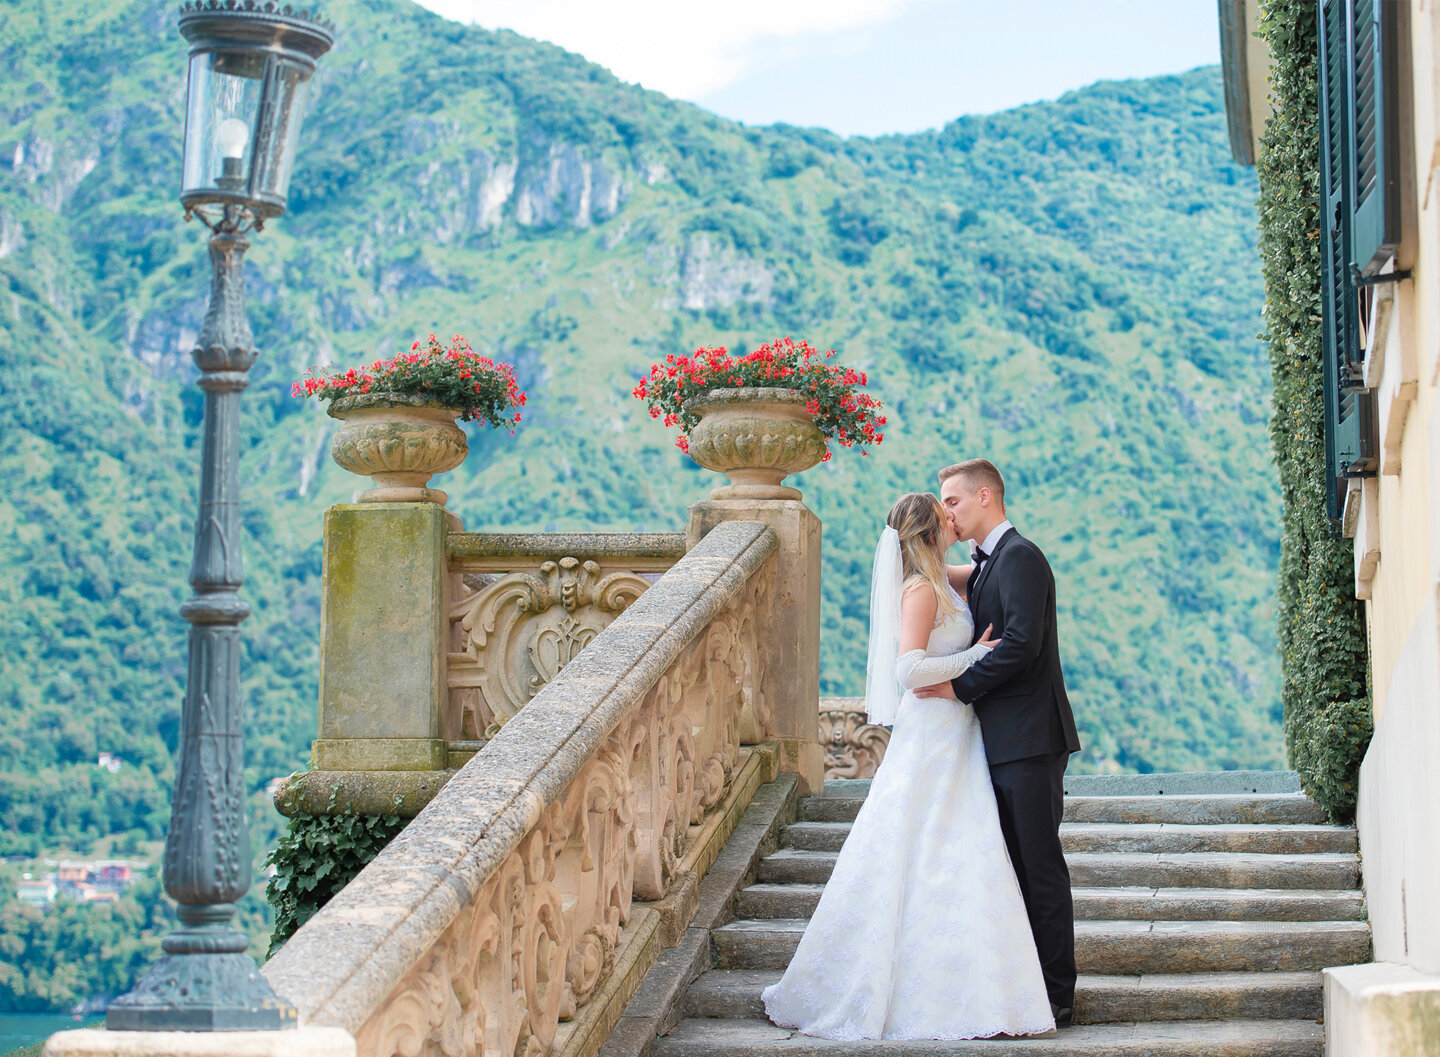 Bride and groom kissing on a stairway